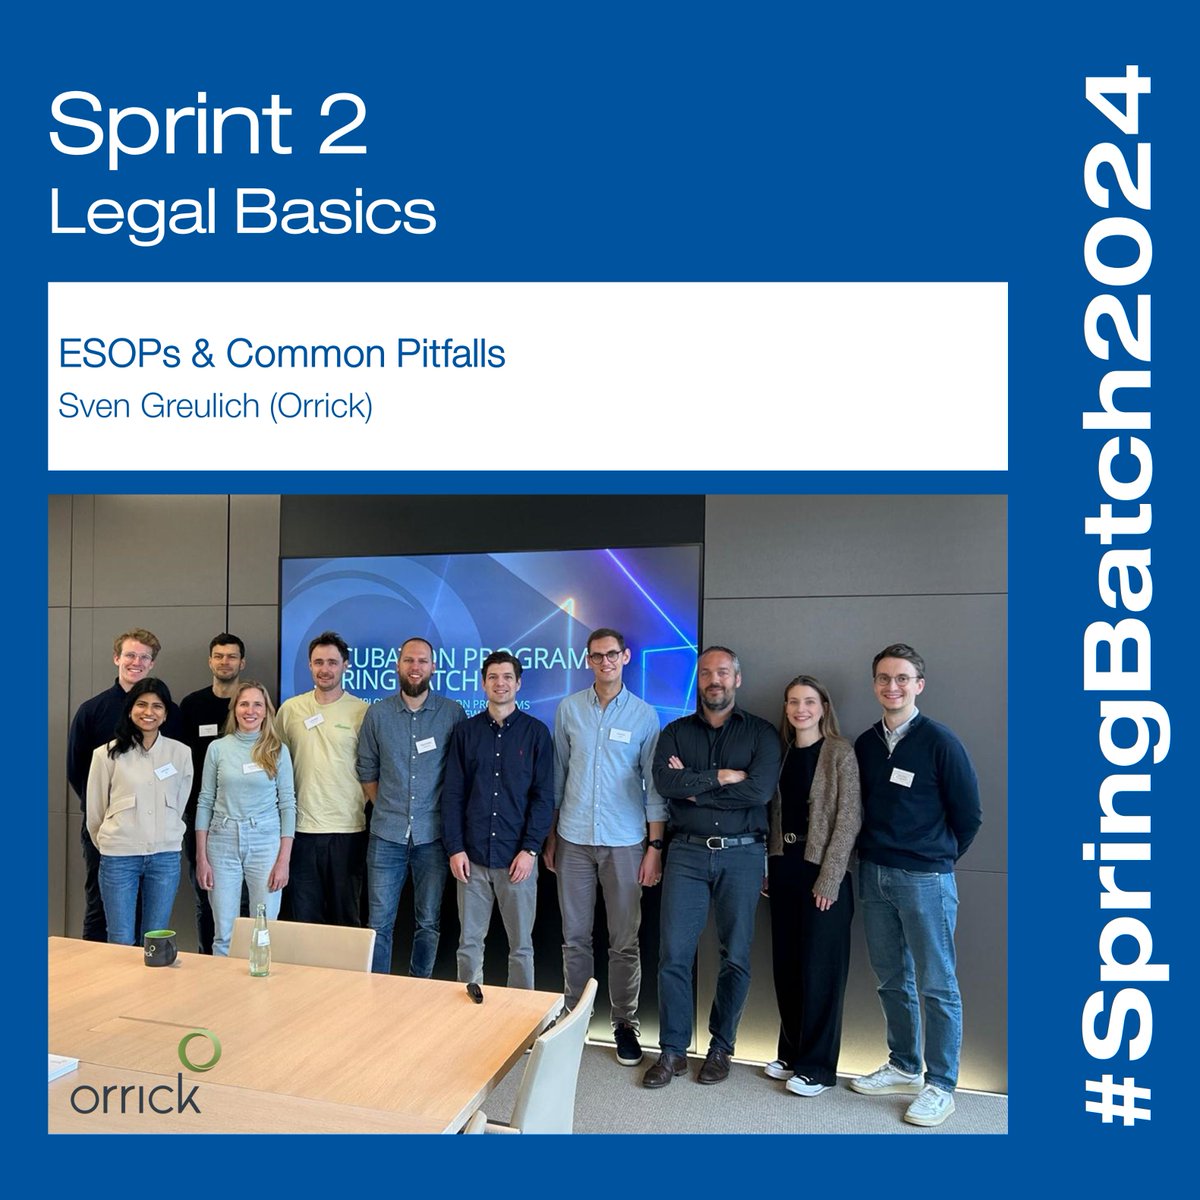 The #SpringBatch2024 of our #RWTHIncubation Program completes #Sprint2 on 'Legal Basics' | In different workshops, our 12 #startups took an in-depth look at legal essentials for new ventures.
Thanks to our partners YPOG, Orrick, Seitz & STS Ventures for hosting us!
#ESCNRW @RWTH